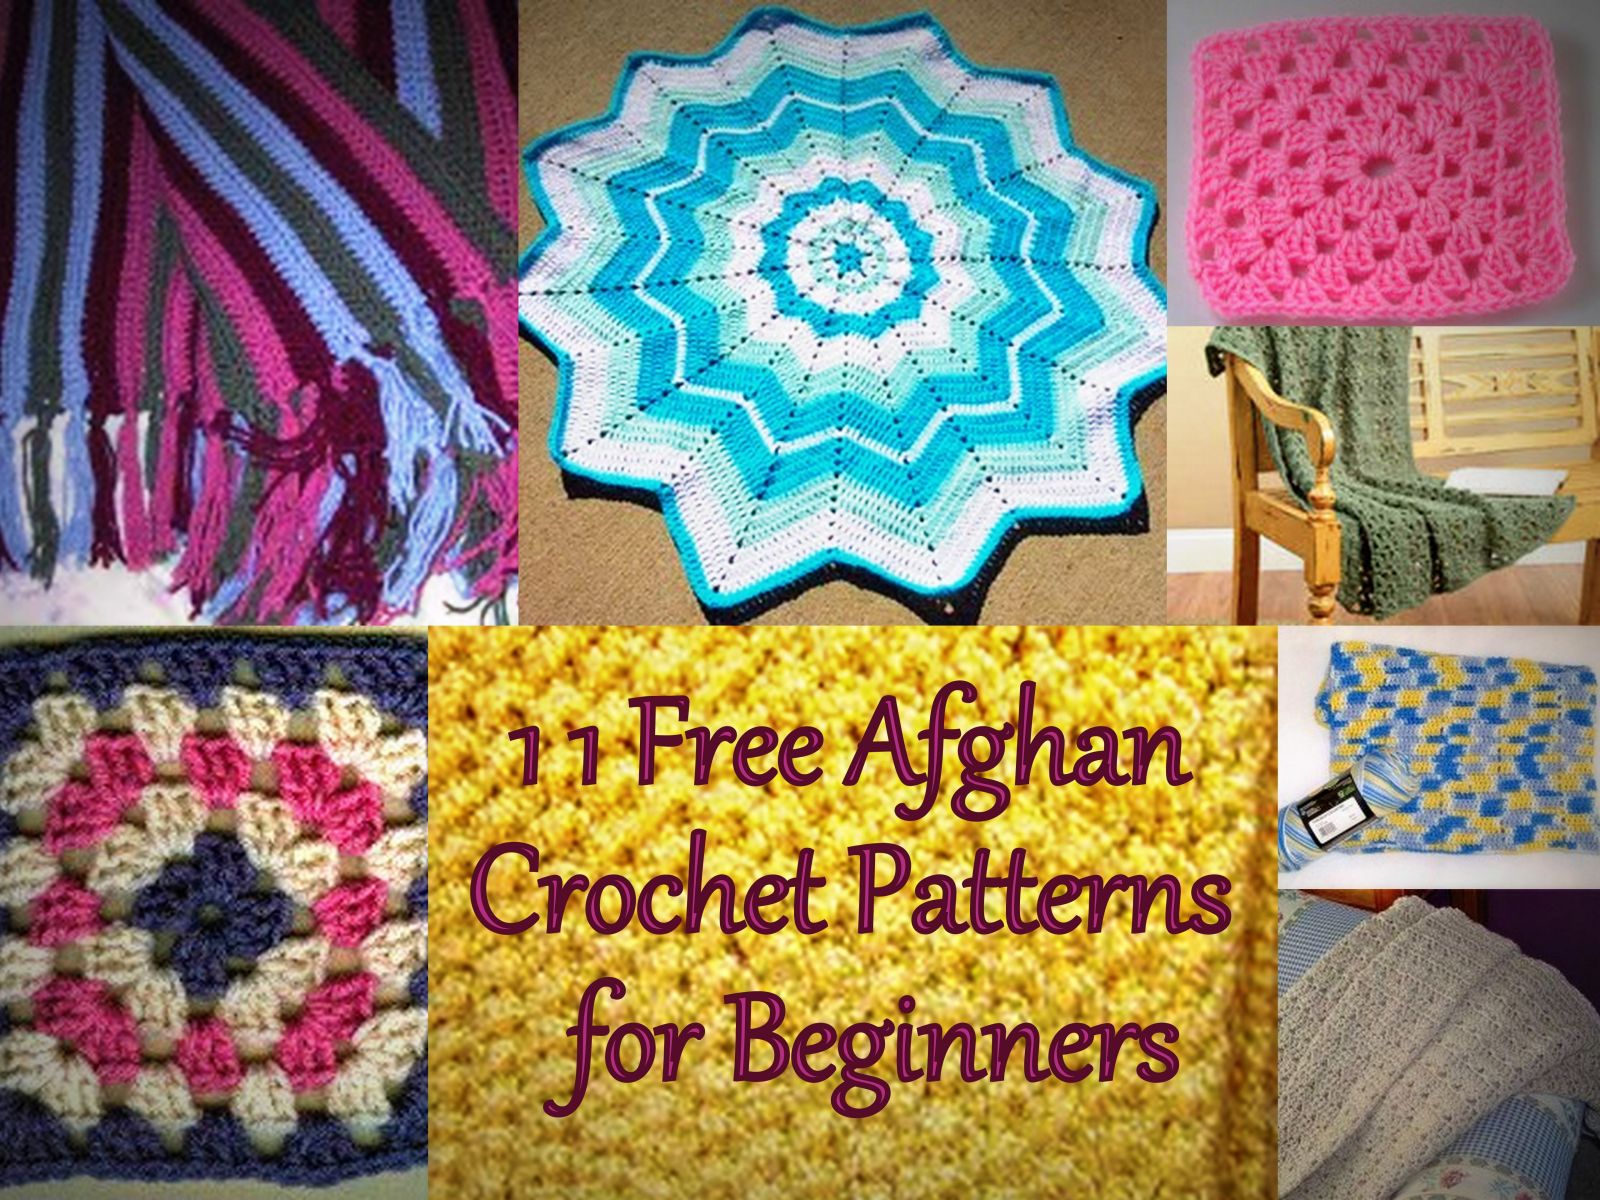 11 Free Afghan Crochet Patterns for Beginners